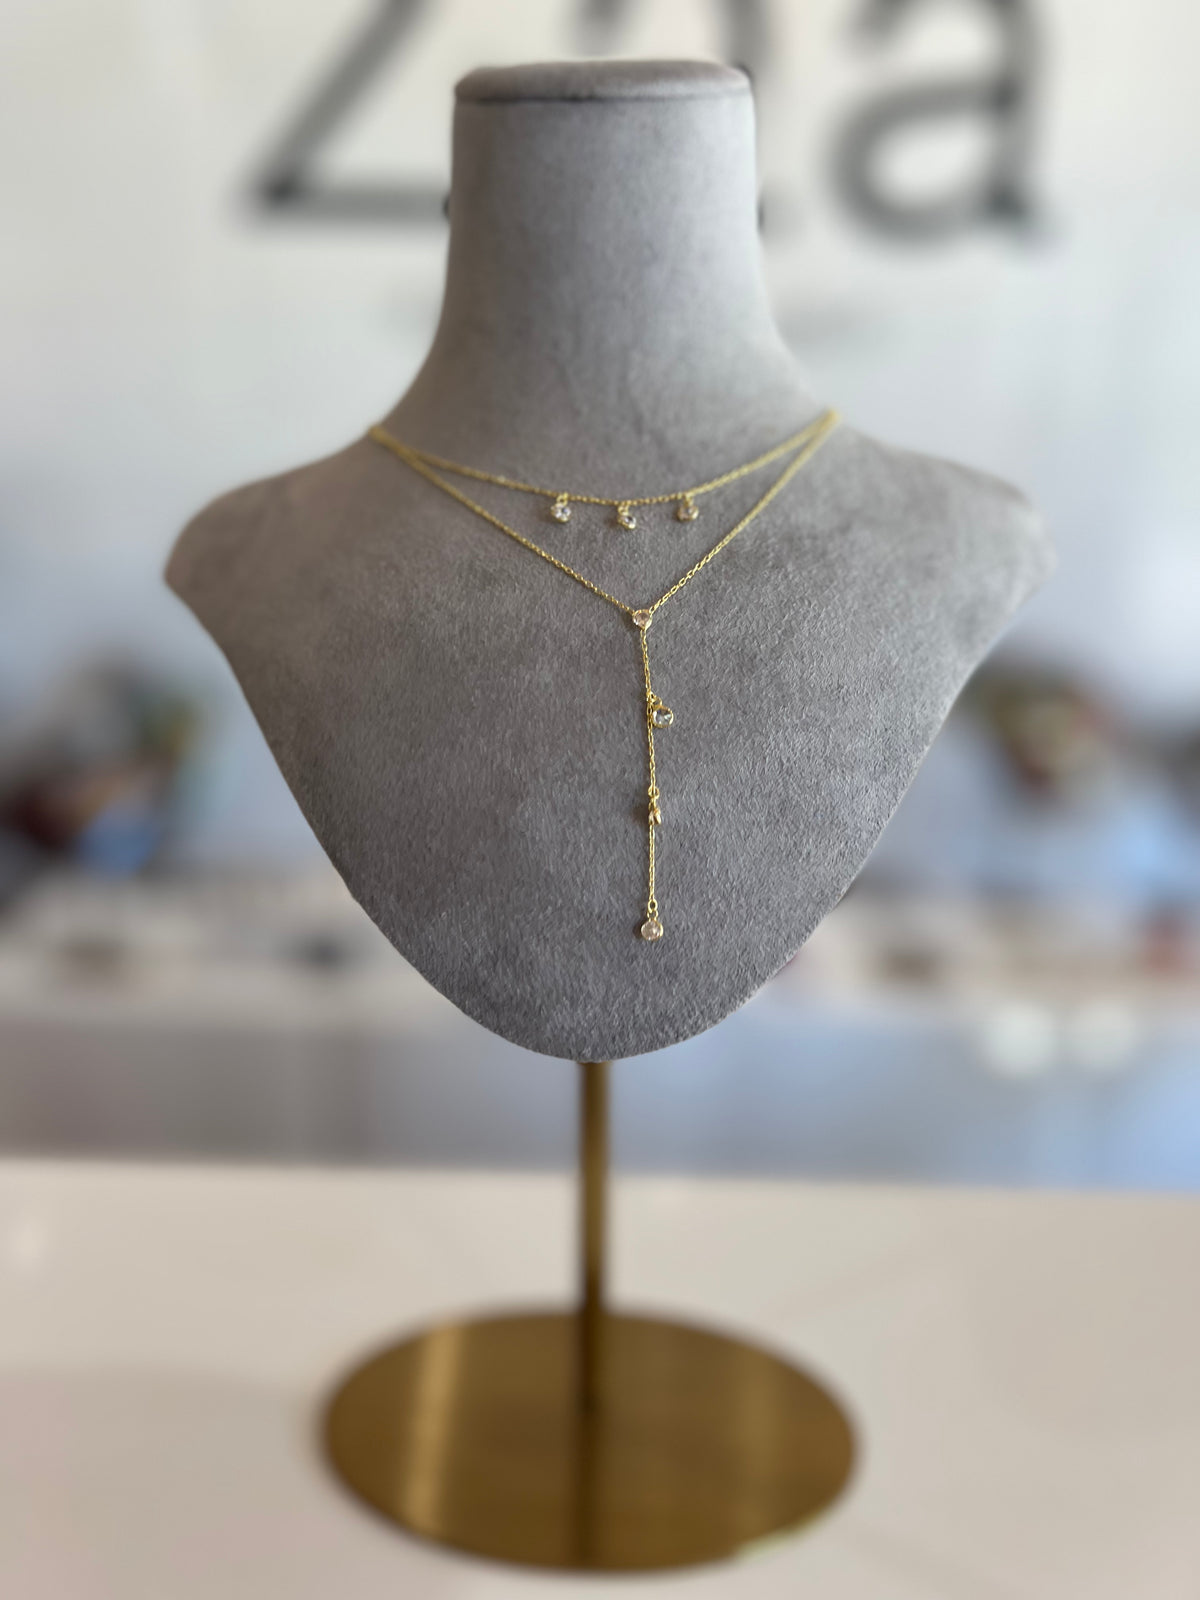 Constellation Necklace with Cubic Zirconias